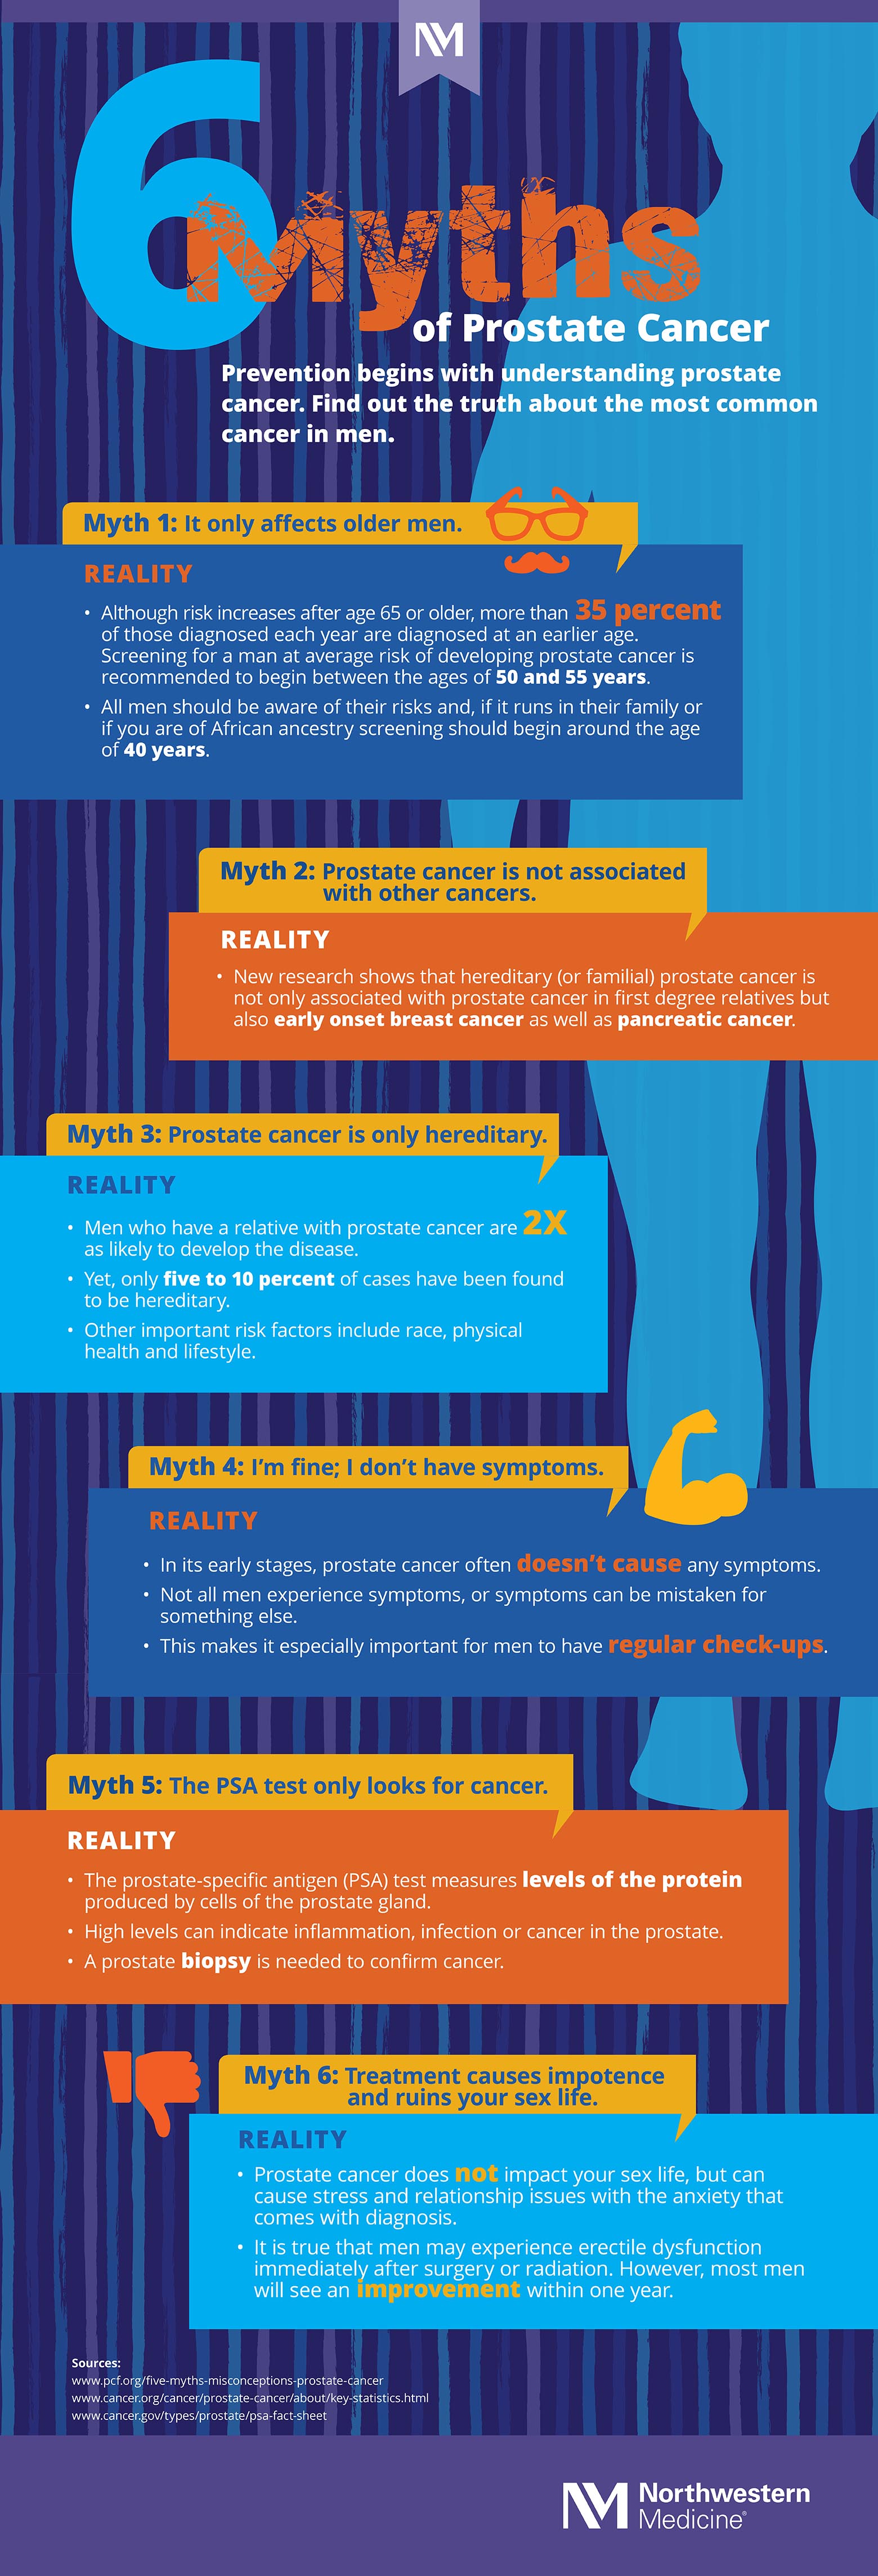 6 Myths of Prostate Cancer (Infographic)